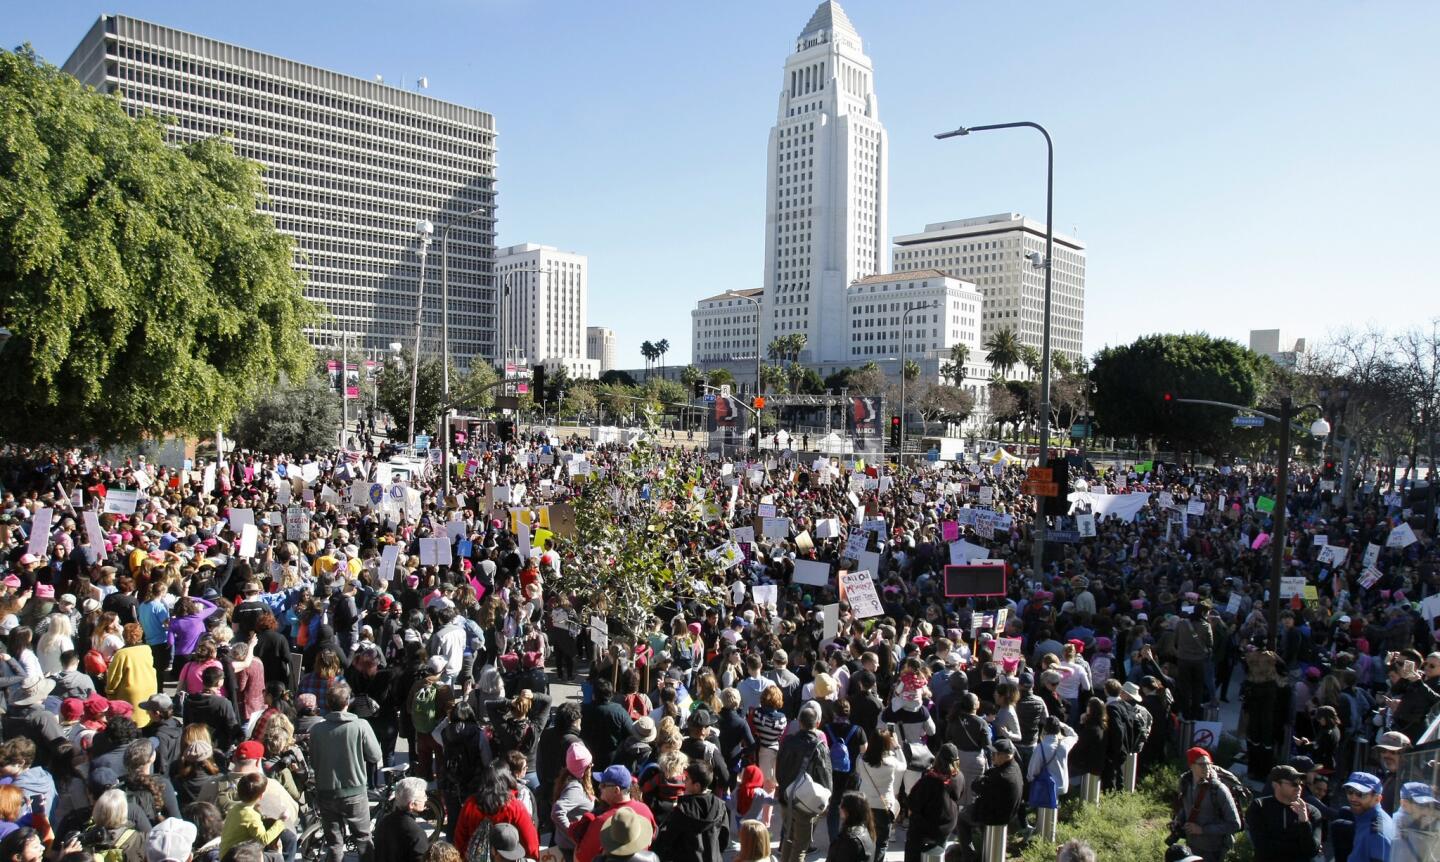 Photo Gallery: More than half million people attend the Women's March LA in downtown Los Angeles